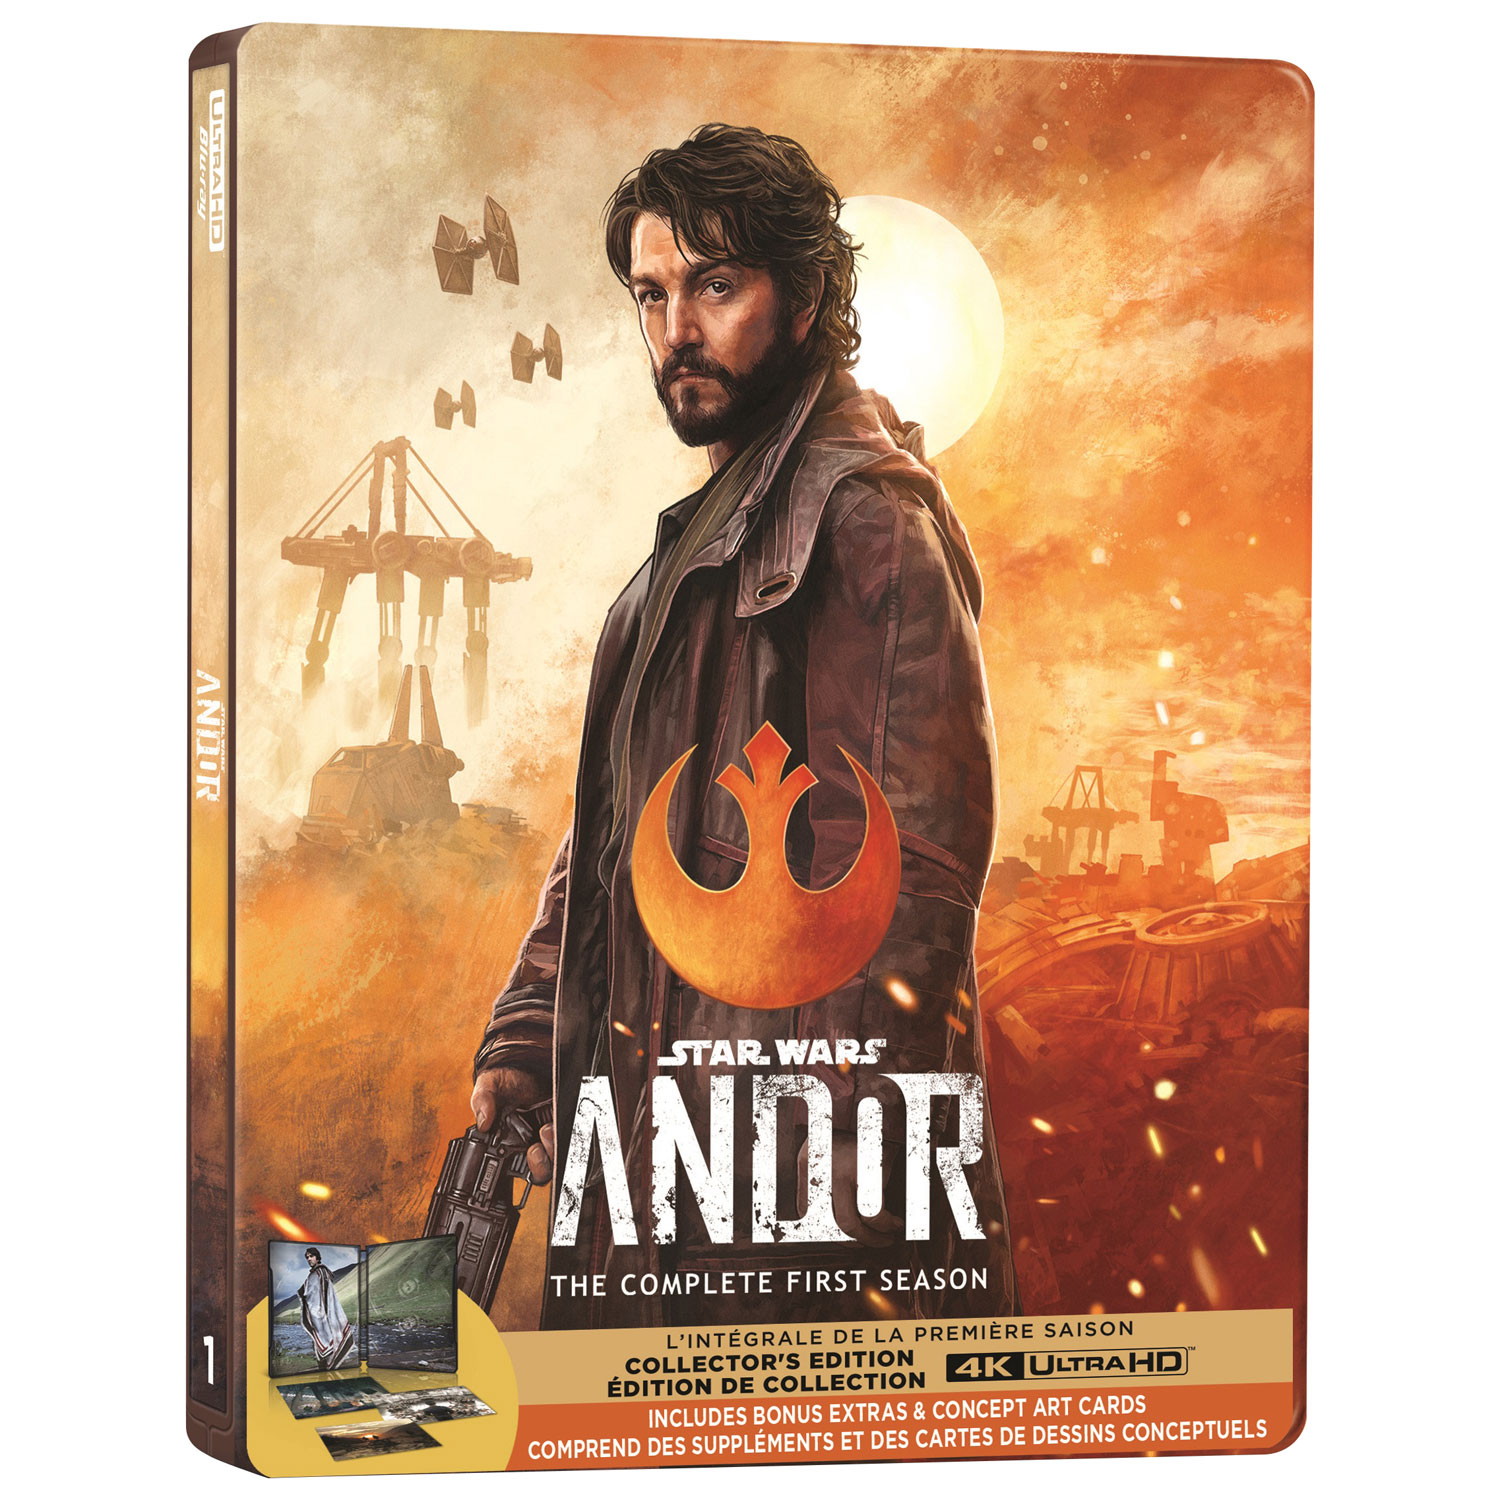 Star Wars Andor: The Complete First Season (Collector's Edition) (4K Ultra HD) (Blu-ray Combo)